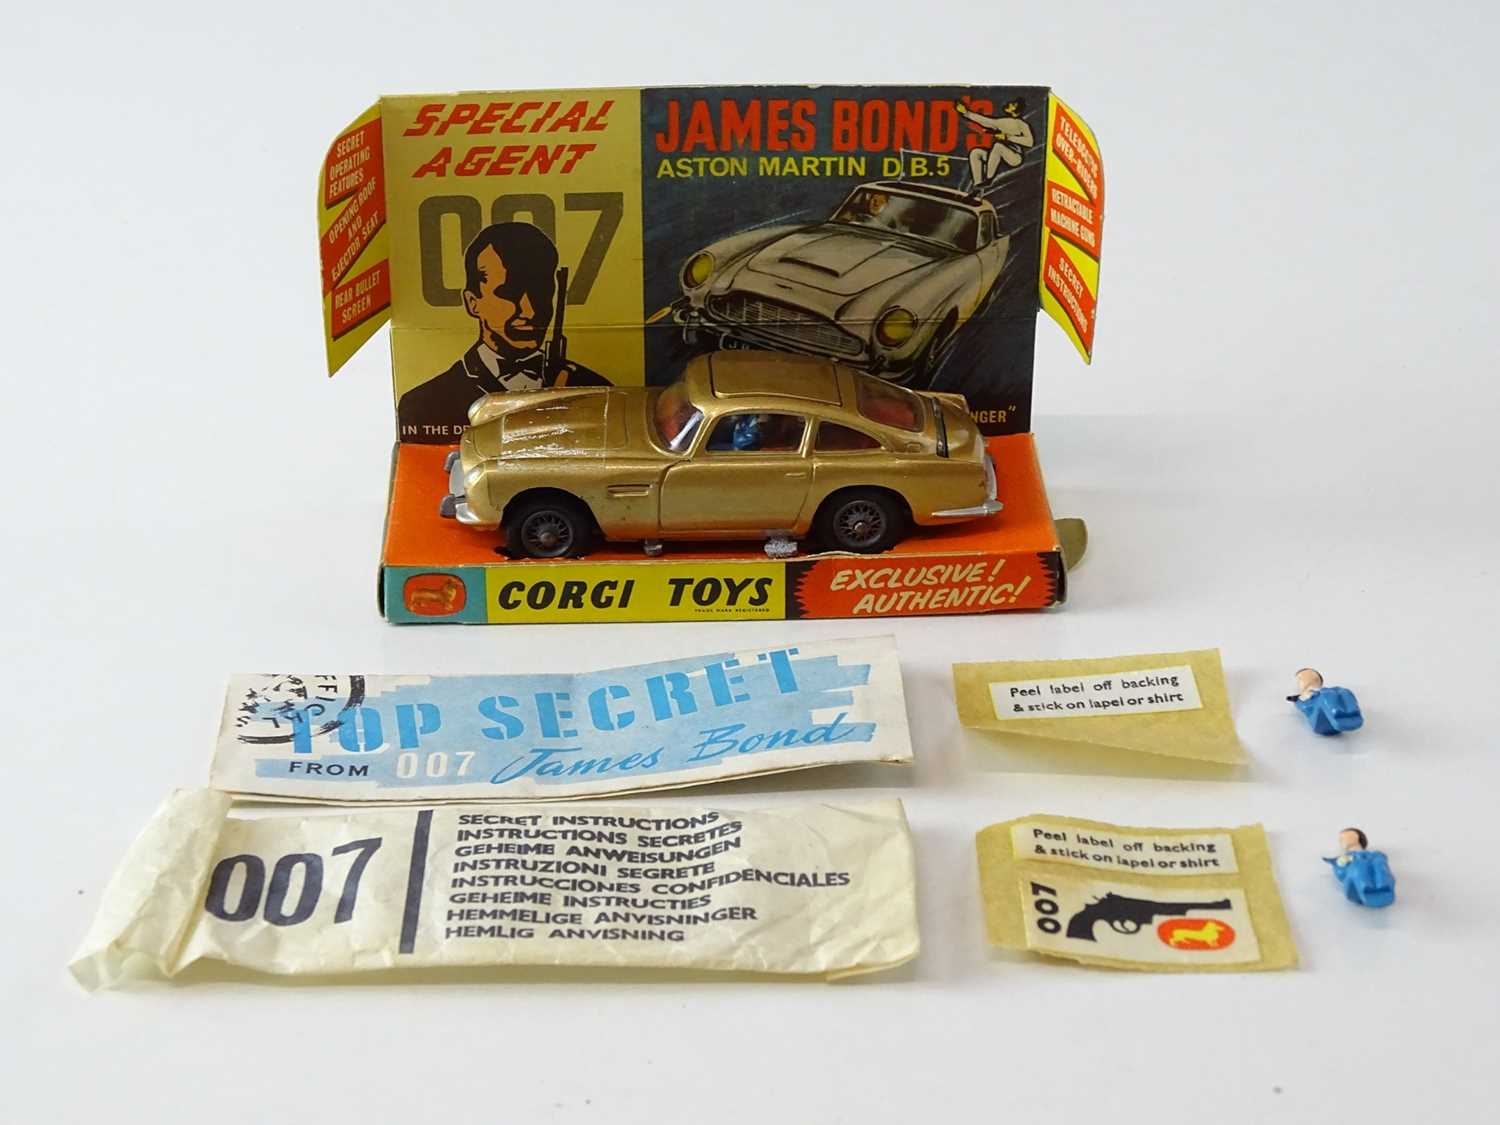 A CORGI Toys 261 James Bond's Aston Martin in gold with working bullet shield, guns and ejector seat